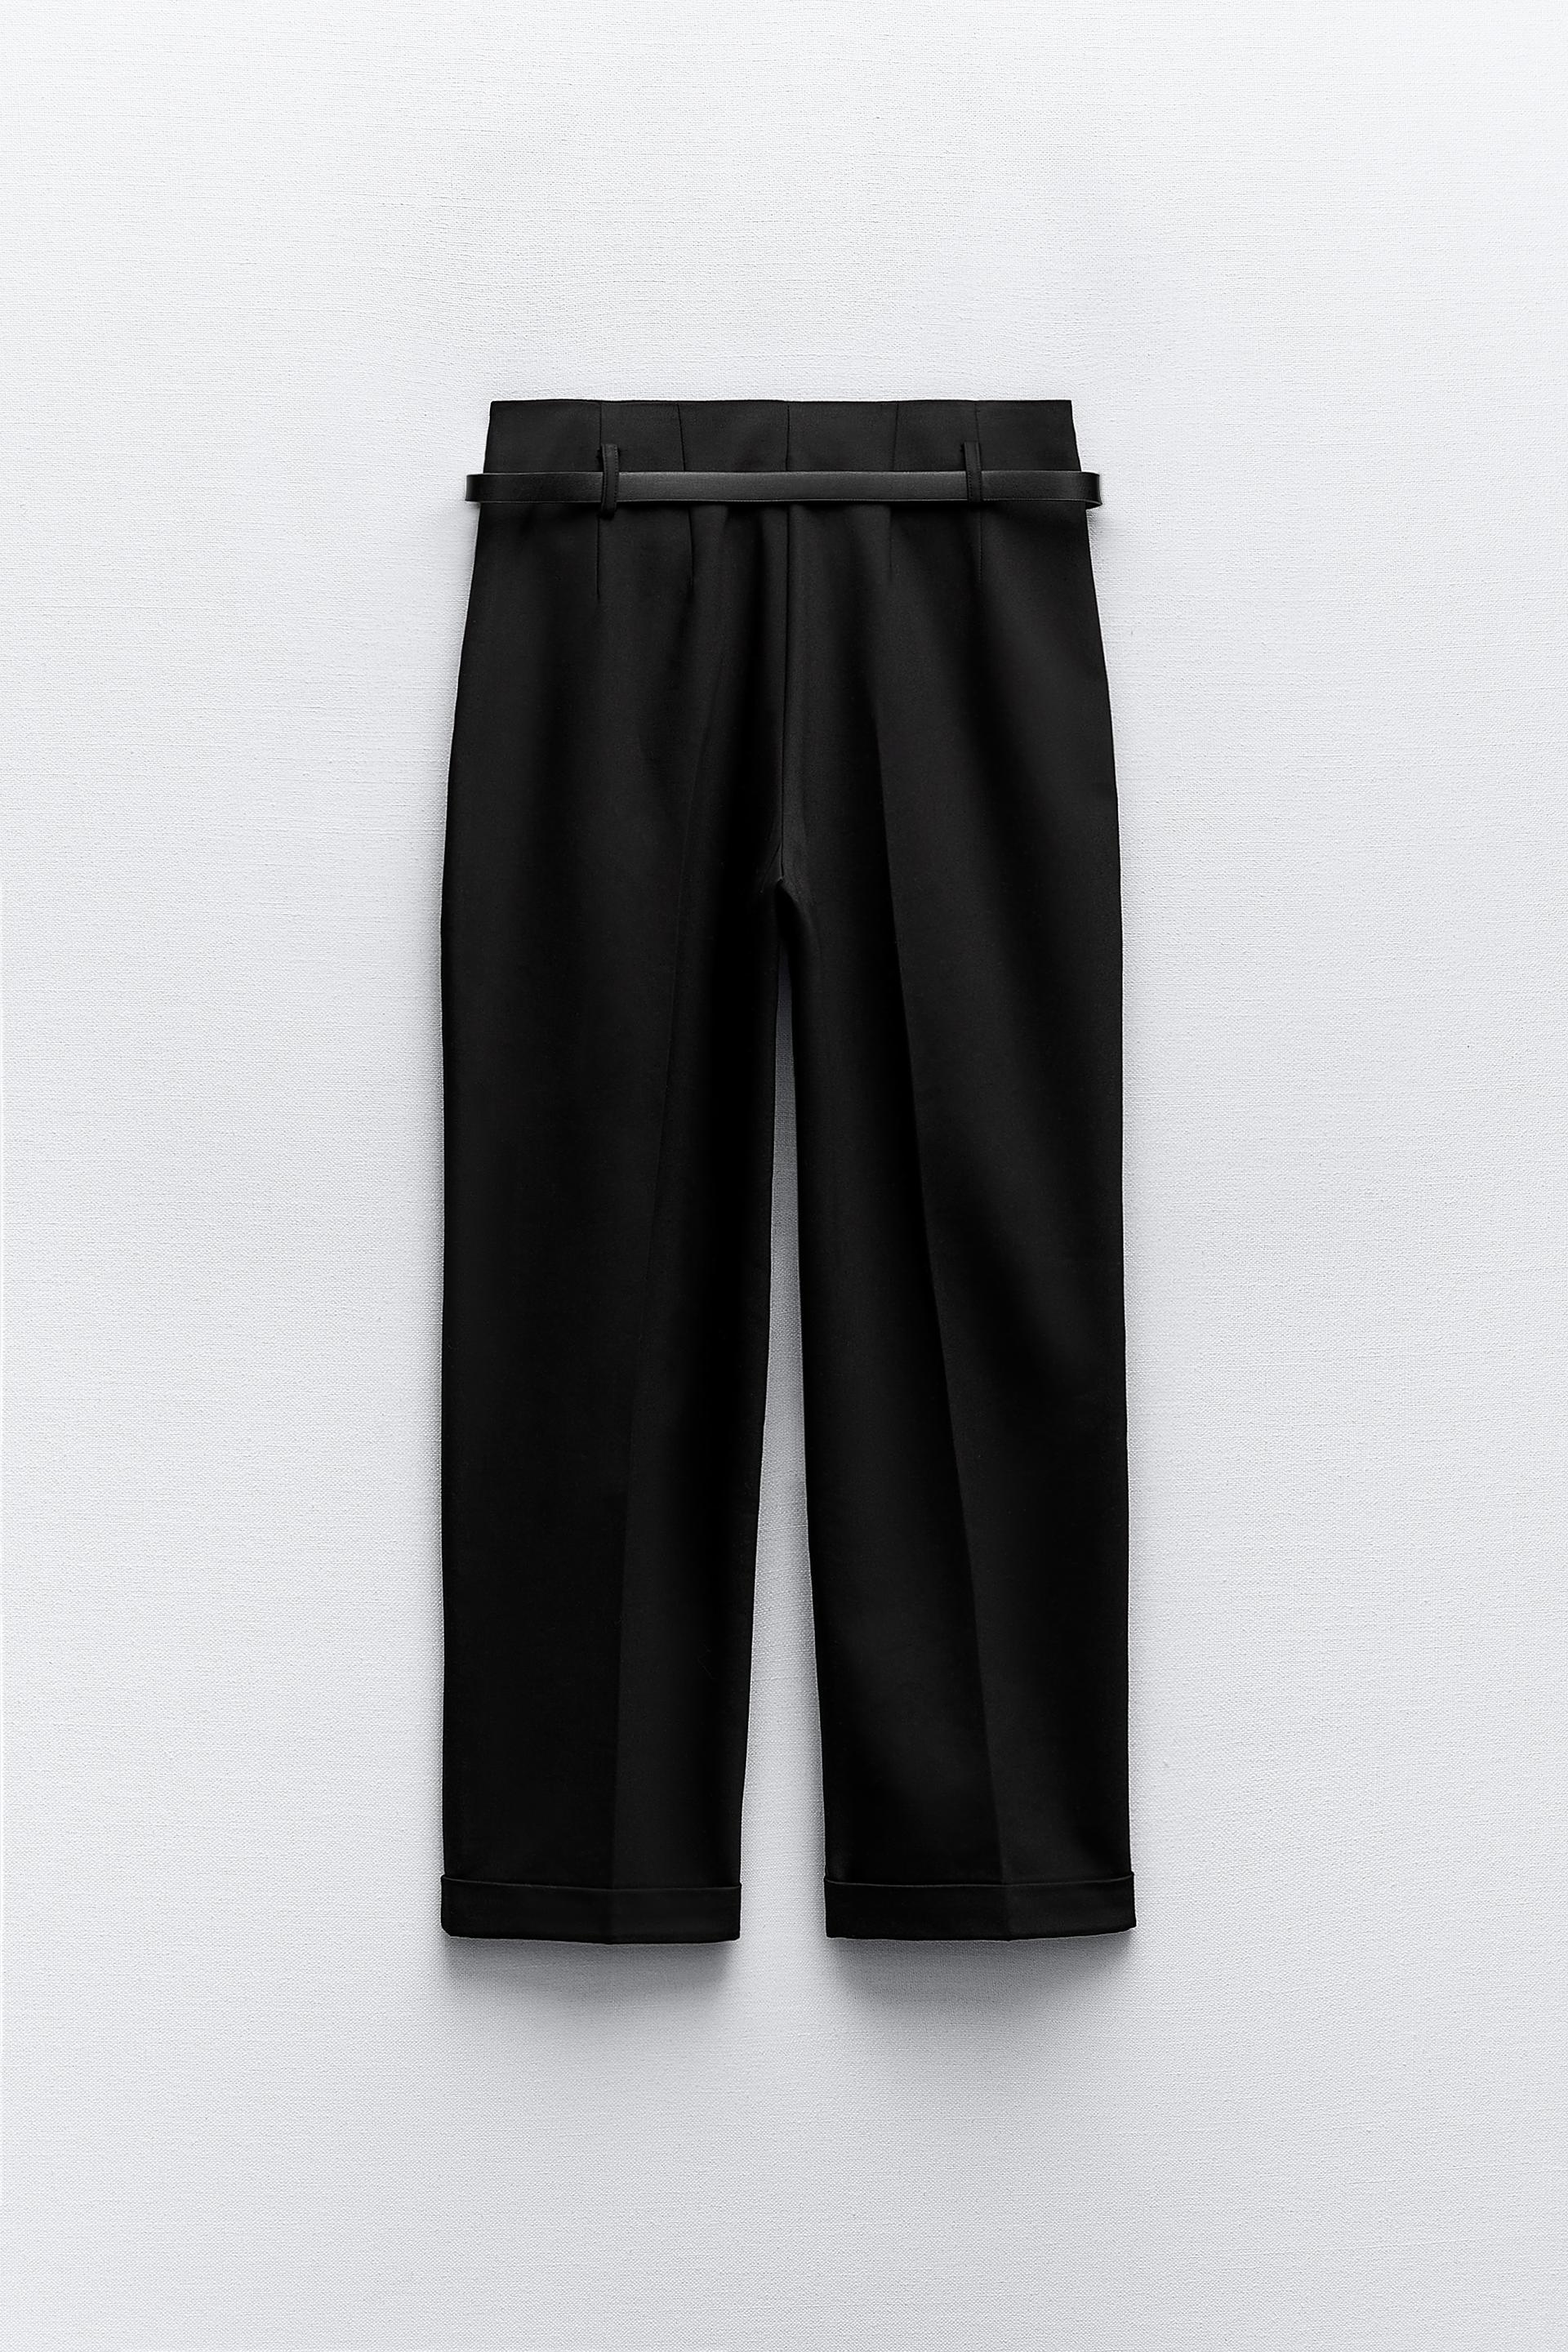 Zara Women Belted trousers 1478/030/803 (Large): Buy Online at